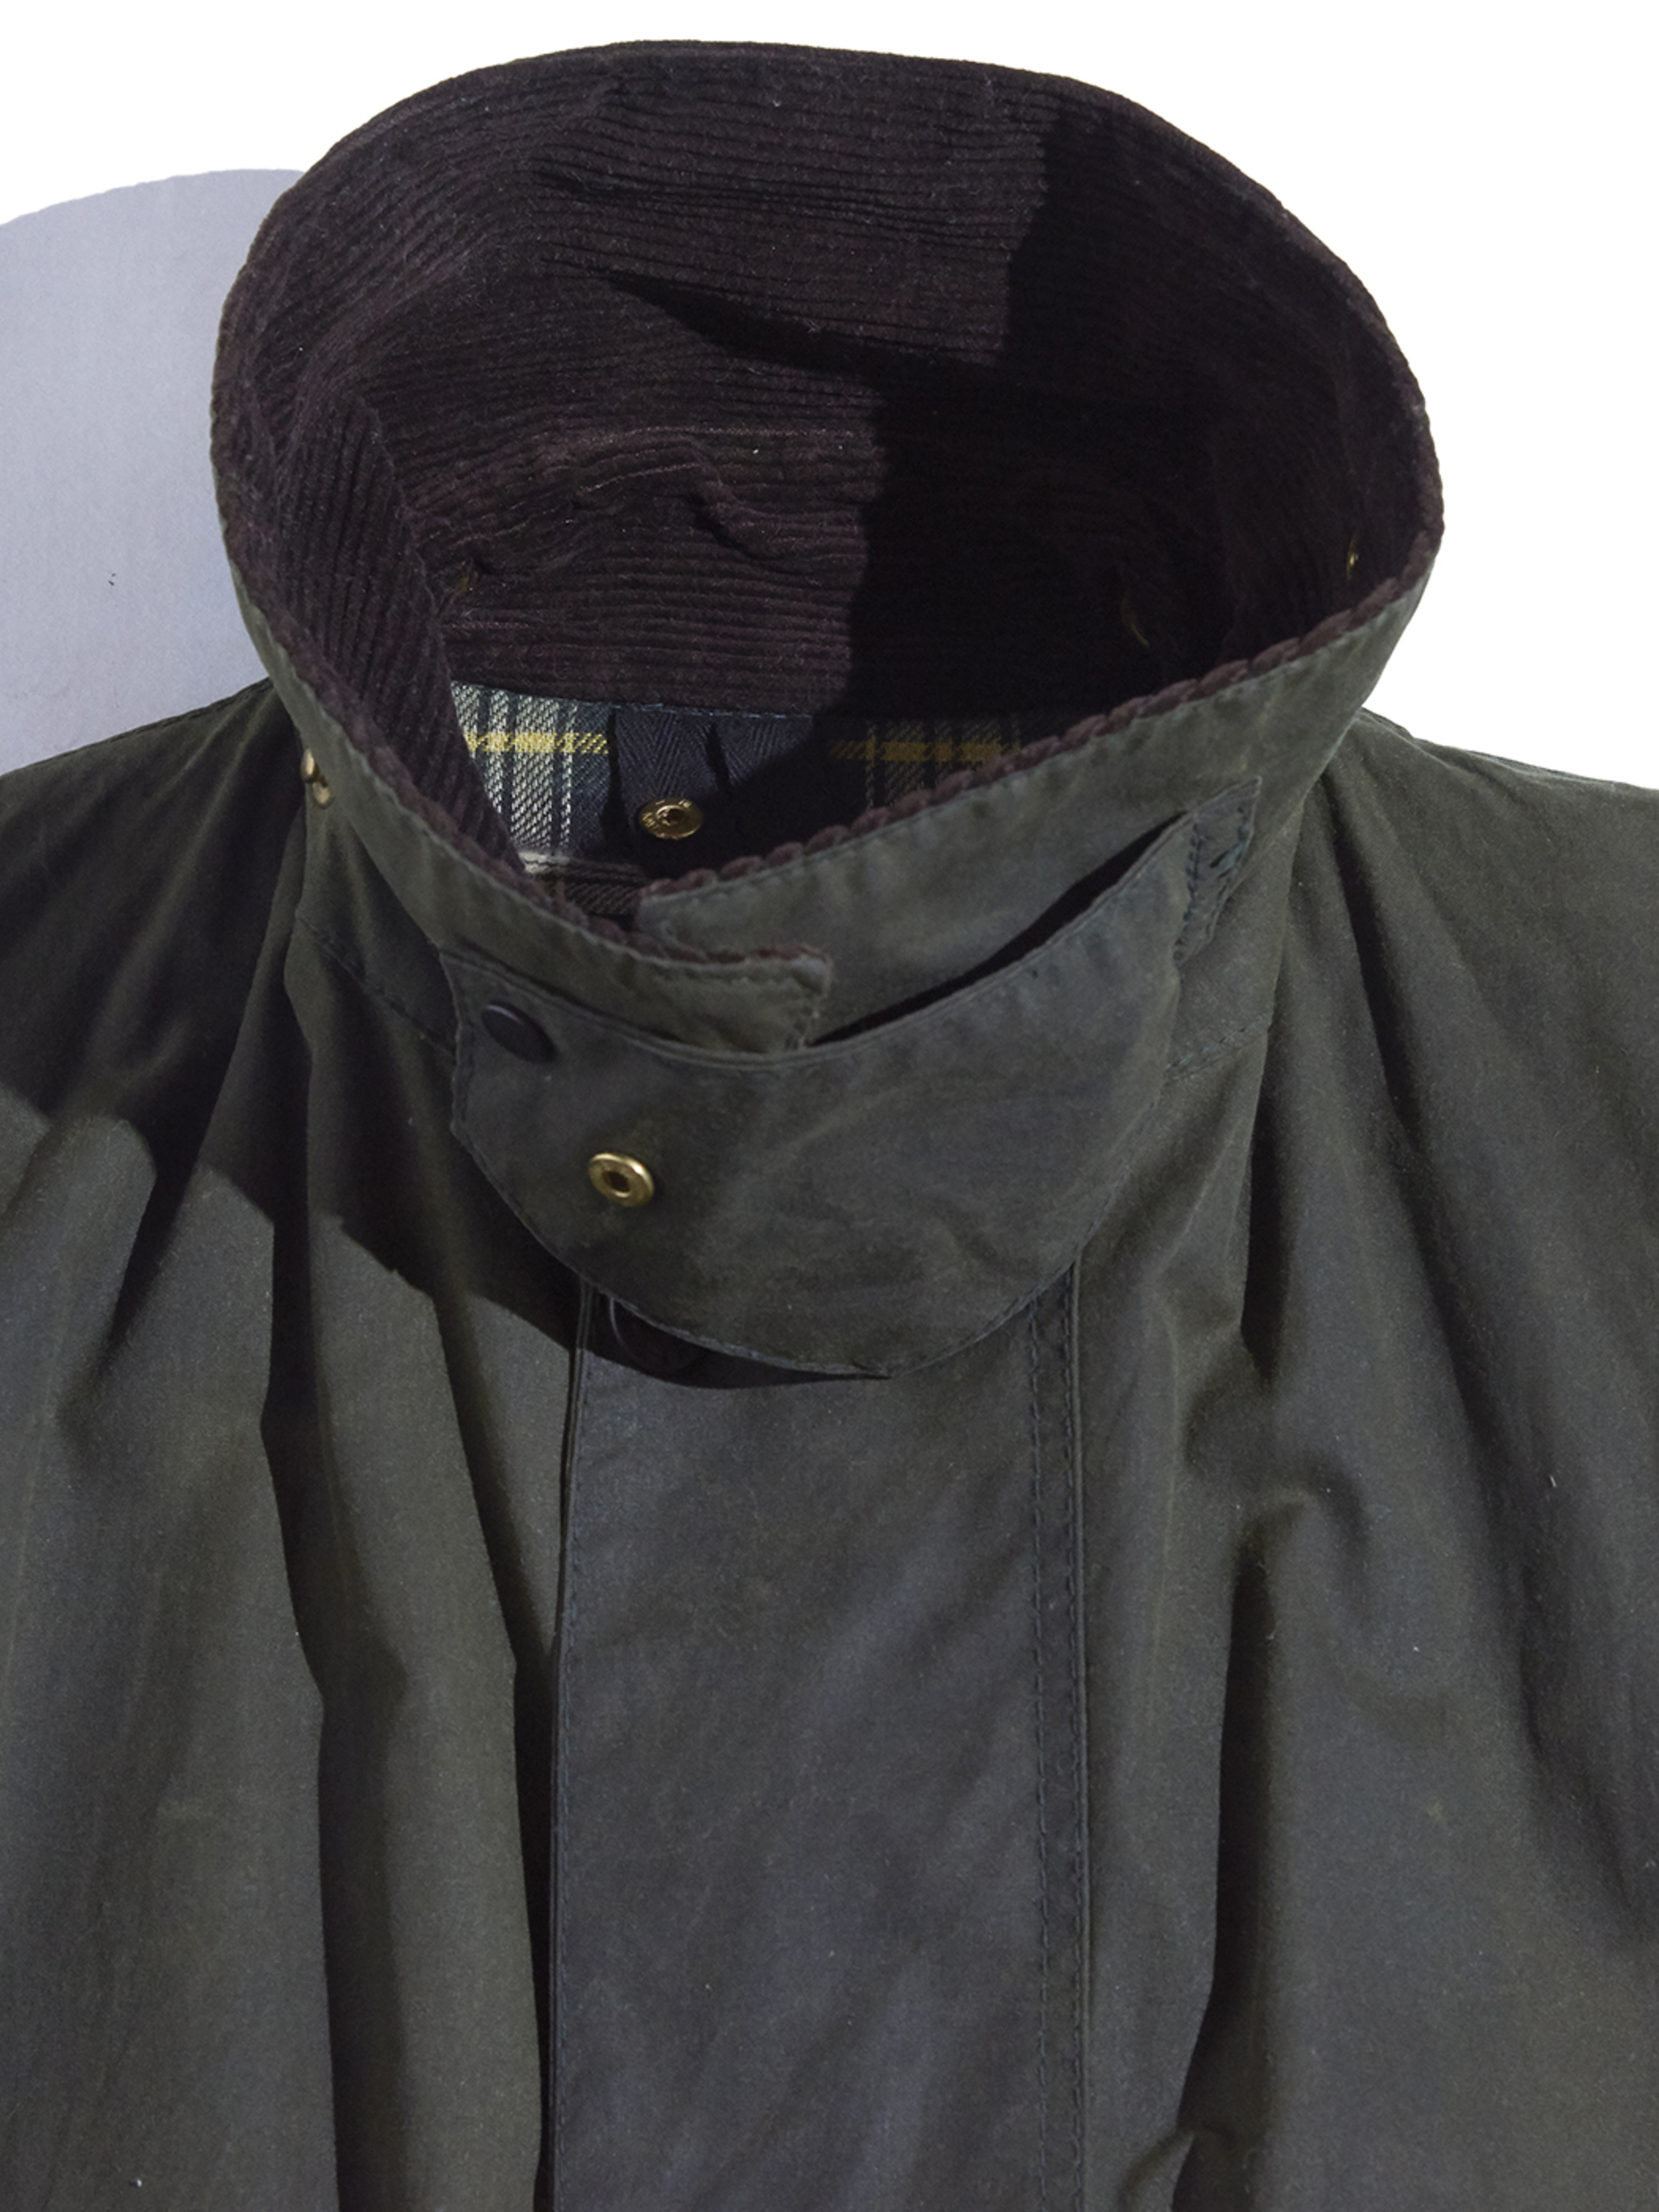 1980s "Barbour" 2warrant BORDER oiled jacket with hood -OLIVE GREEN-